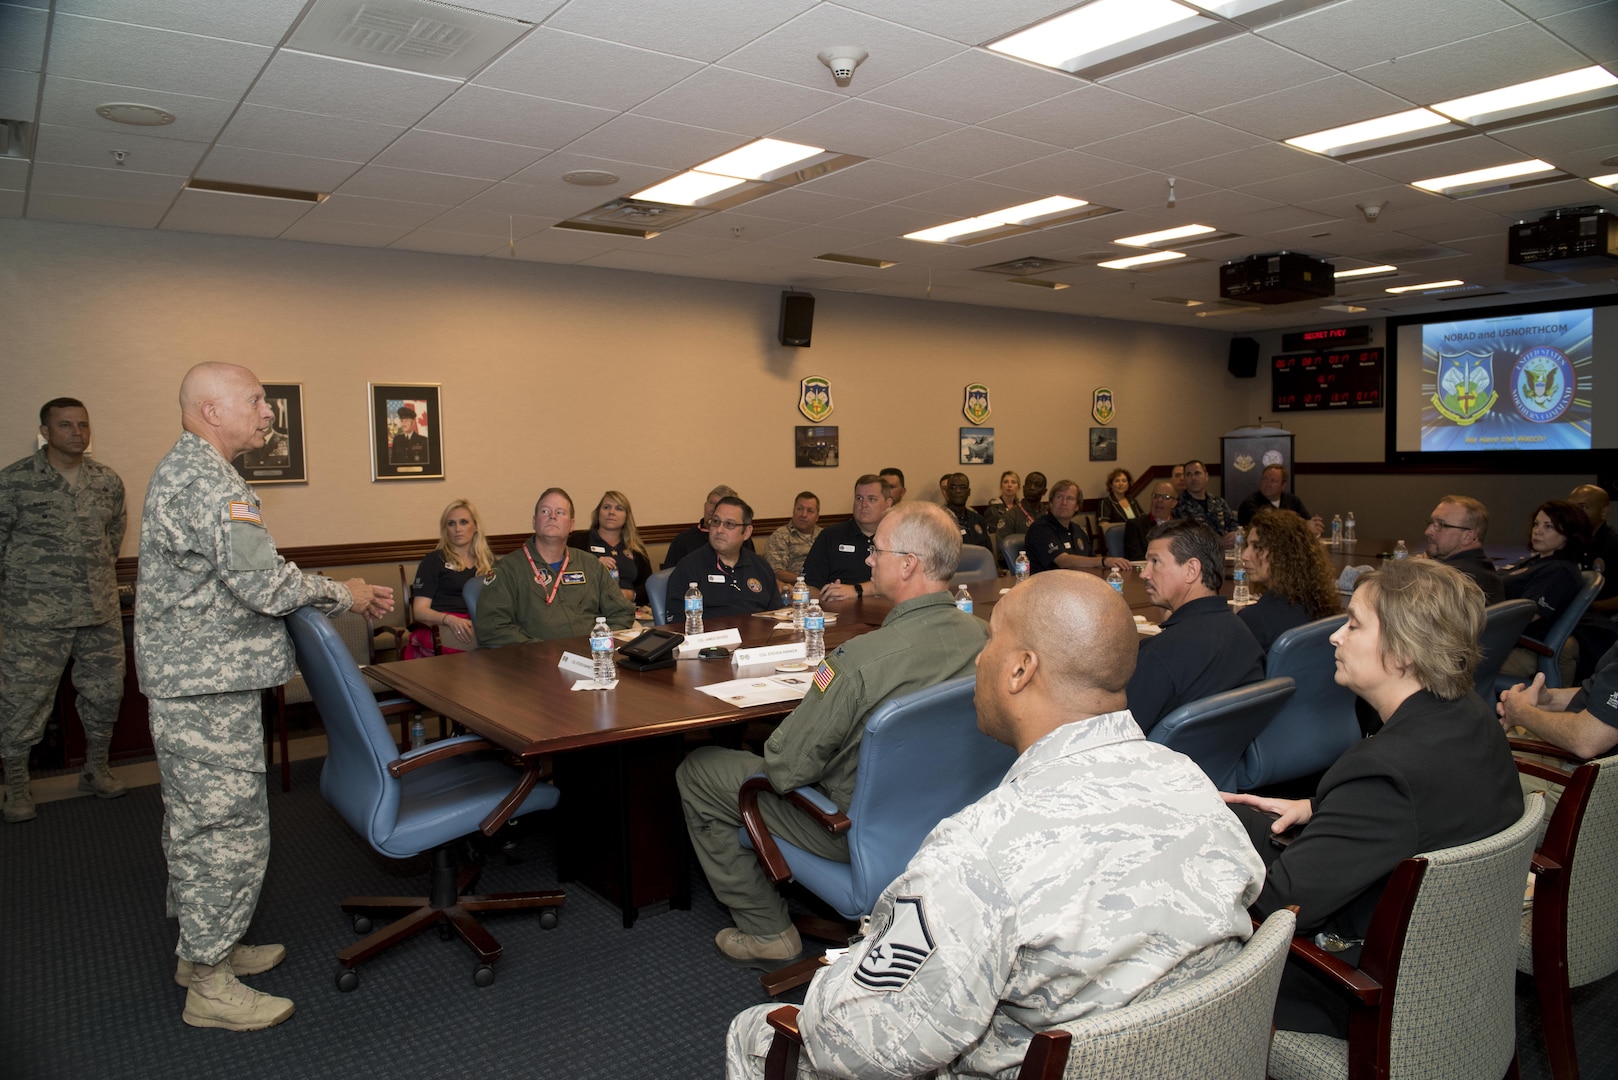 Community leaders from the state of Georgia are greeted by Maj. Gen. Daniel York, Director of Reserve Forces at NORAD and USNORTHCOM, Aug. 19, 2016.  The community leaders were part of a civic leader tour and were flown to Colorado by the 94th Airlift Wing from Dobbins ARB, Ga.  The experience allowed the civic leaders to gain a clearer understanding of the roles and missions of various military organizations with an emphasis on the Air Force Reserve. 